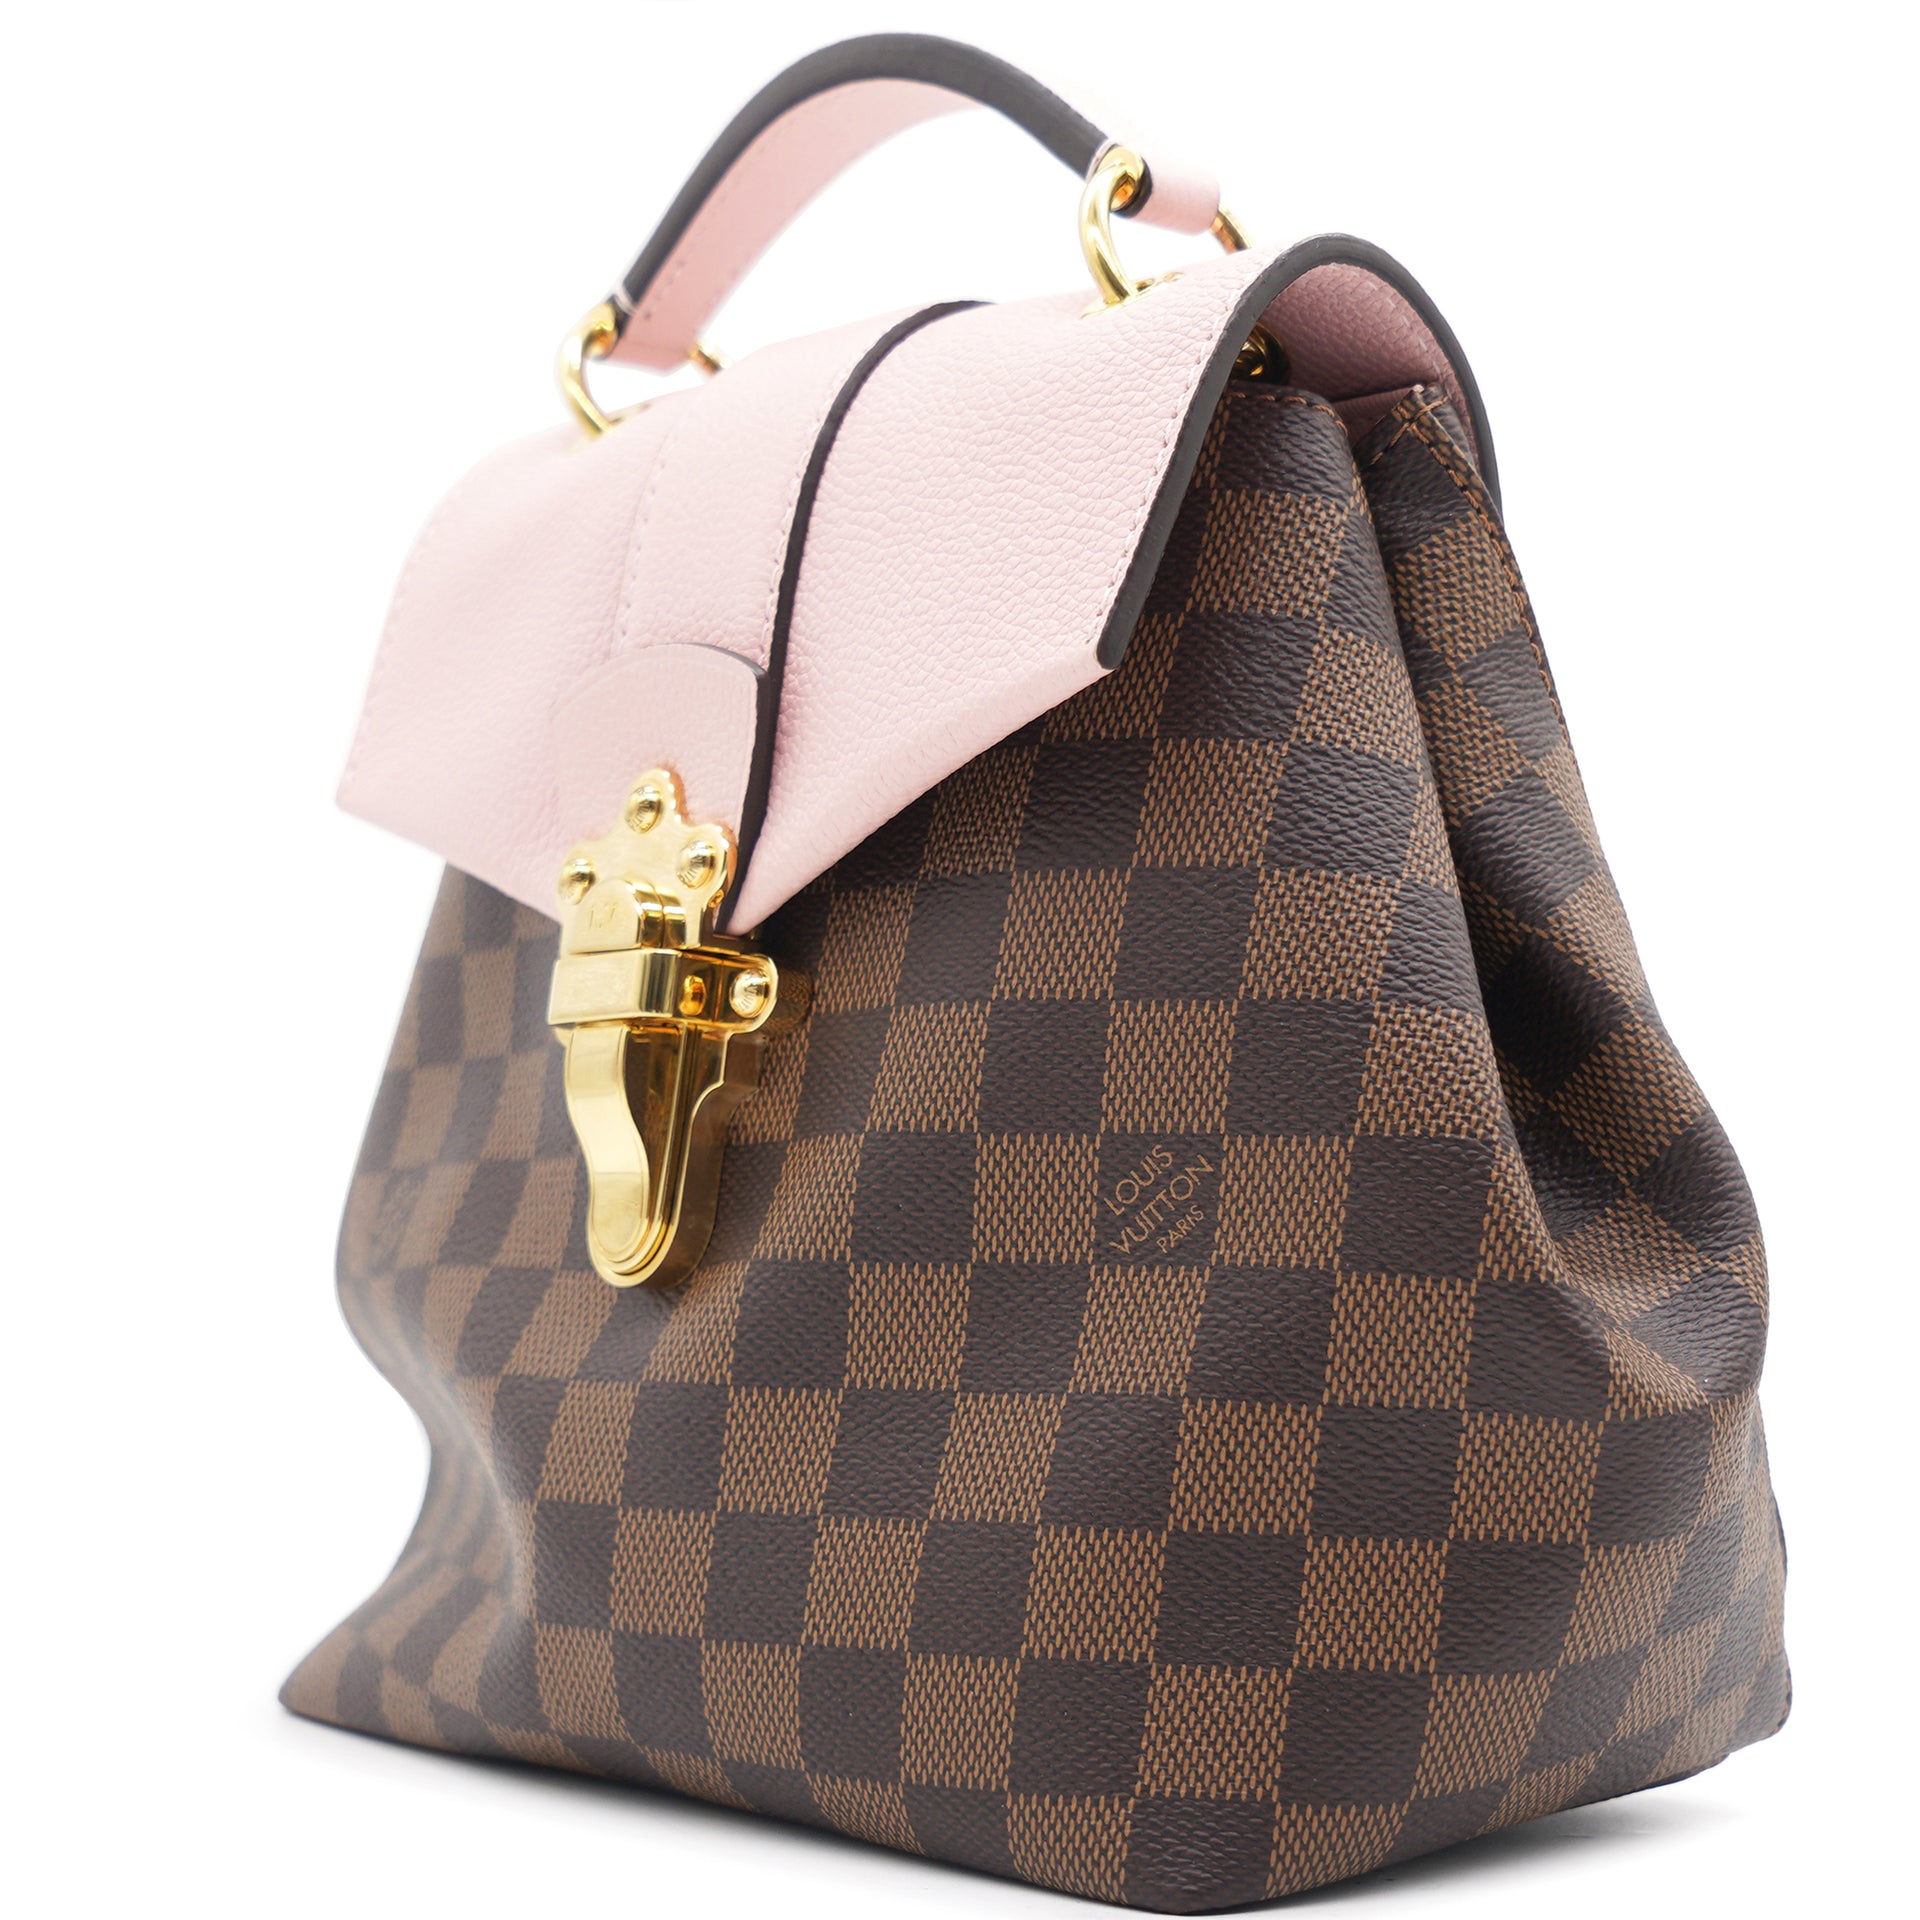 Louis Vuitton Clapton Backpack Magnolia coming in this week!!